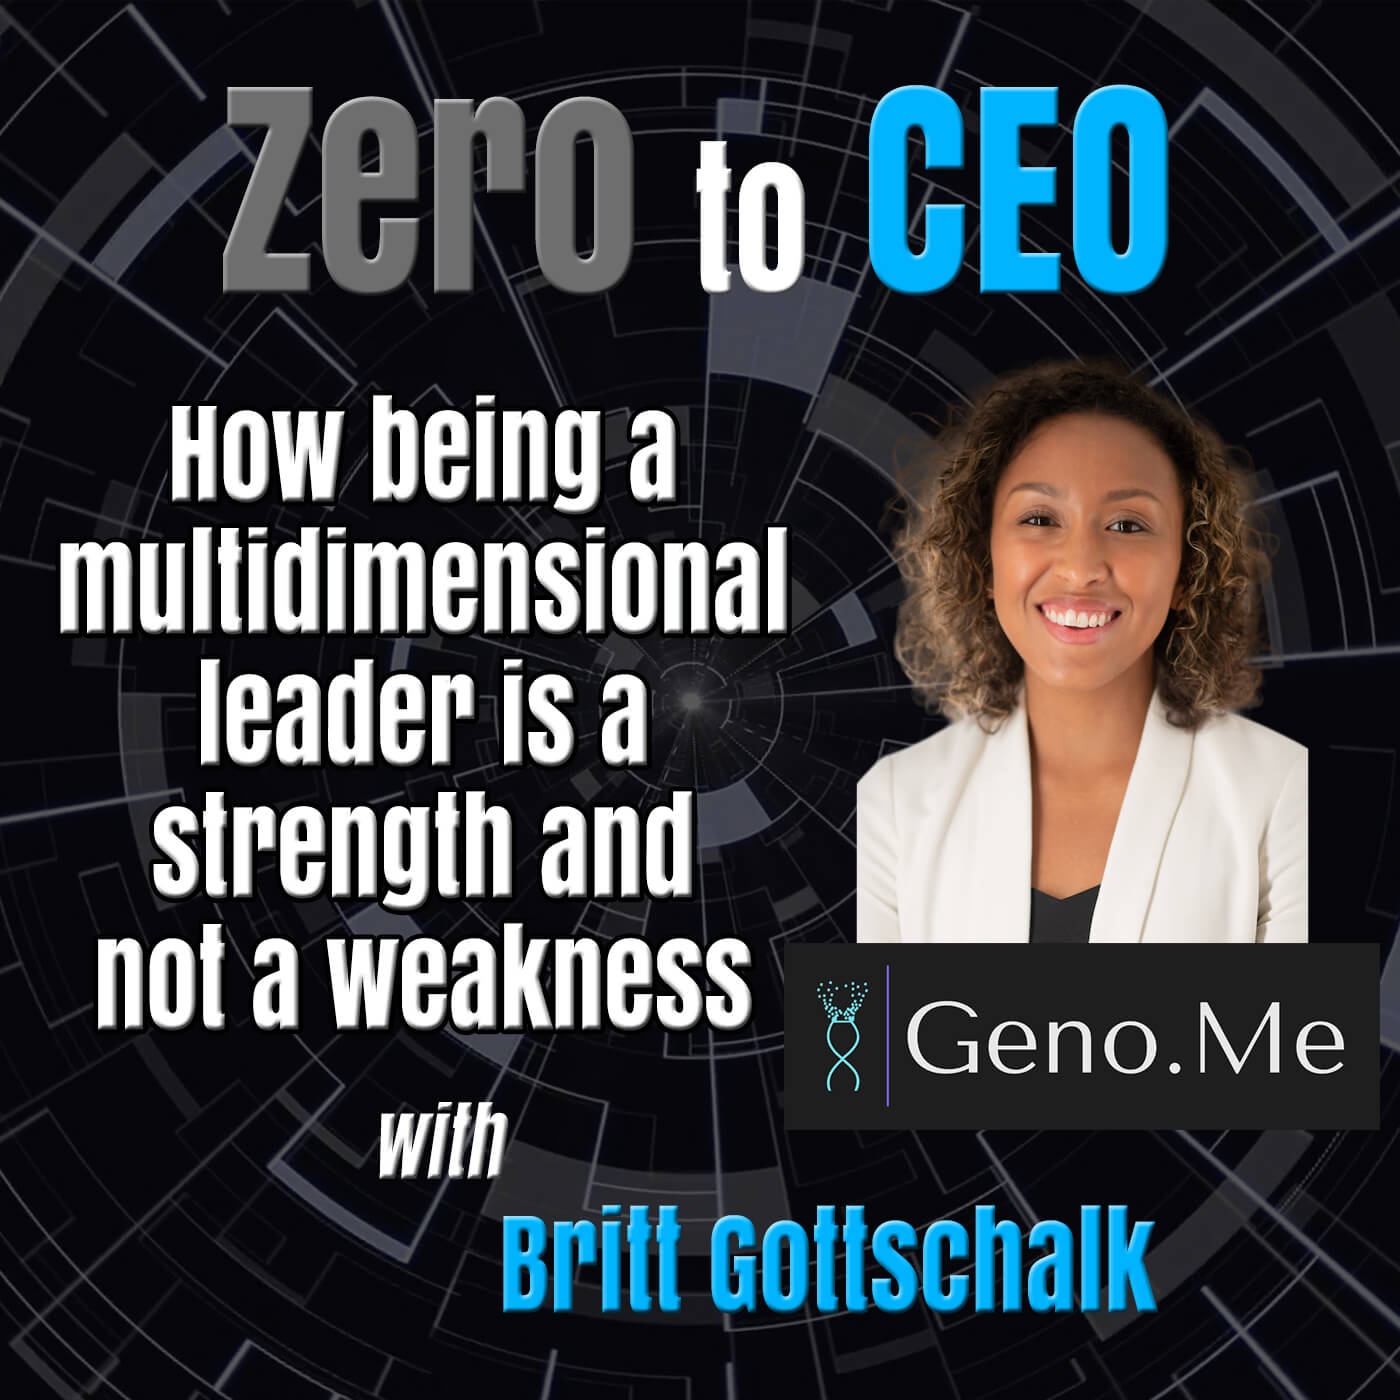 Zero to CEO: How being a multidimensional leader is a strength and not a weakness with Britt Gottschalk